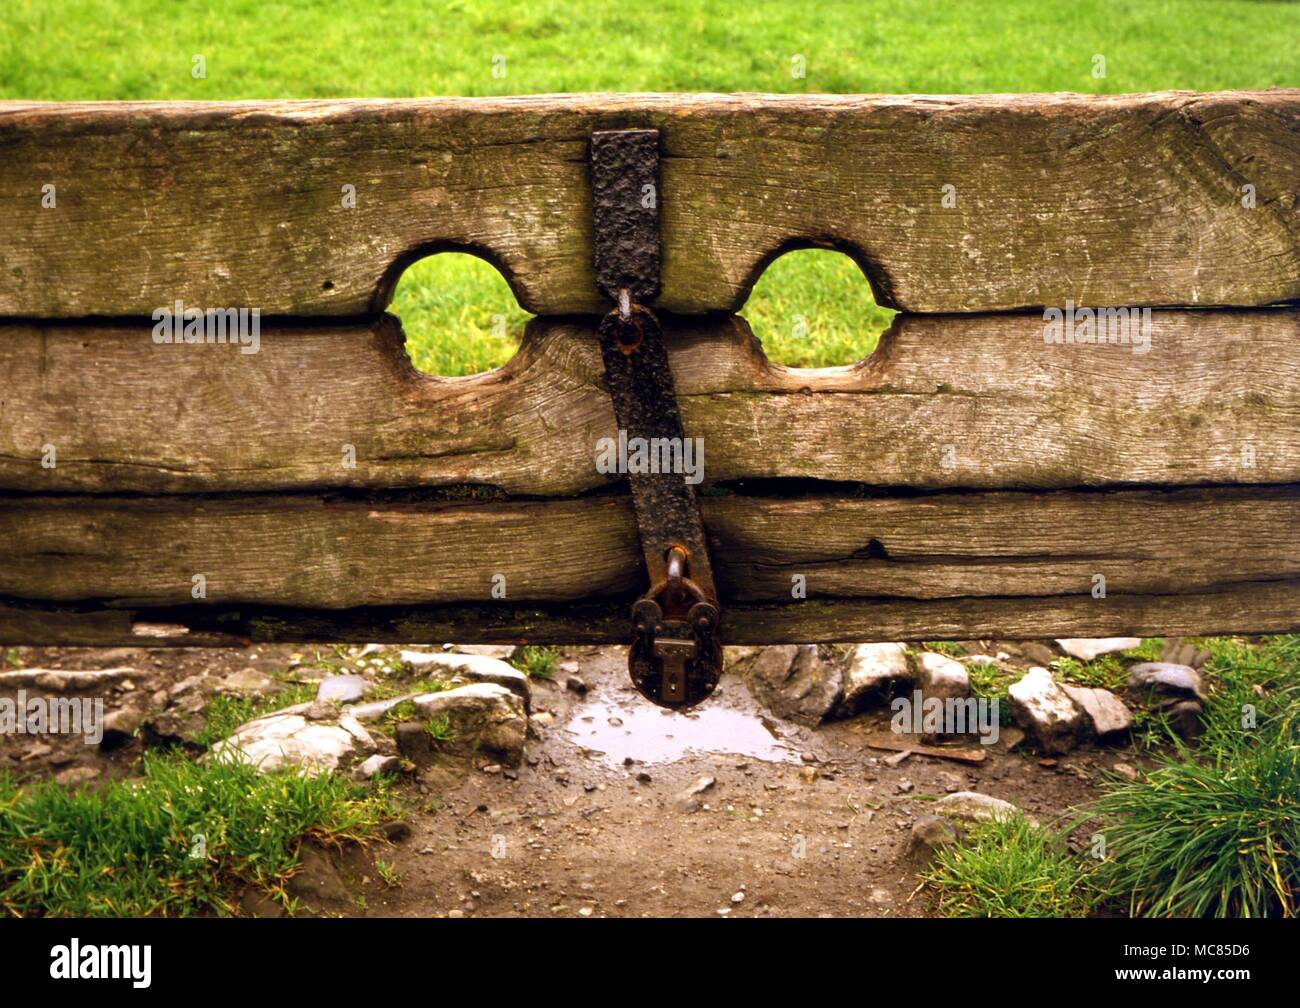 Stocks in the plague village of Eyam. During the 1665 plague, the village elected to isolate itself, rather than be responsible for spreading the disease further. The original village stocks are still on public view. Stock Photo